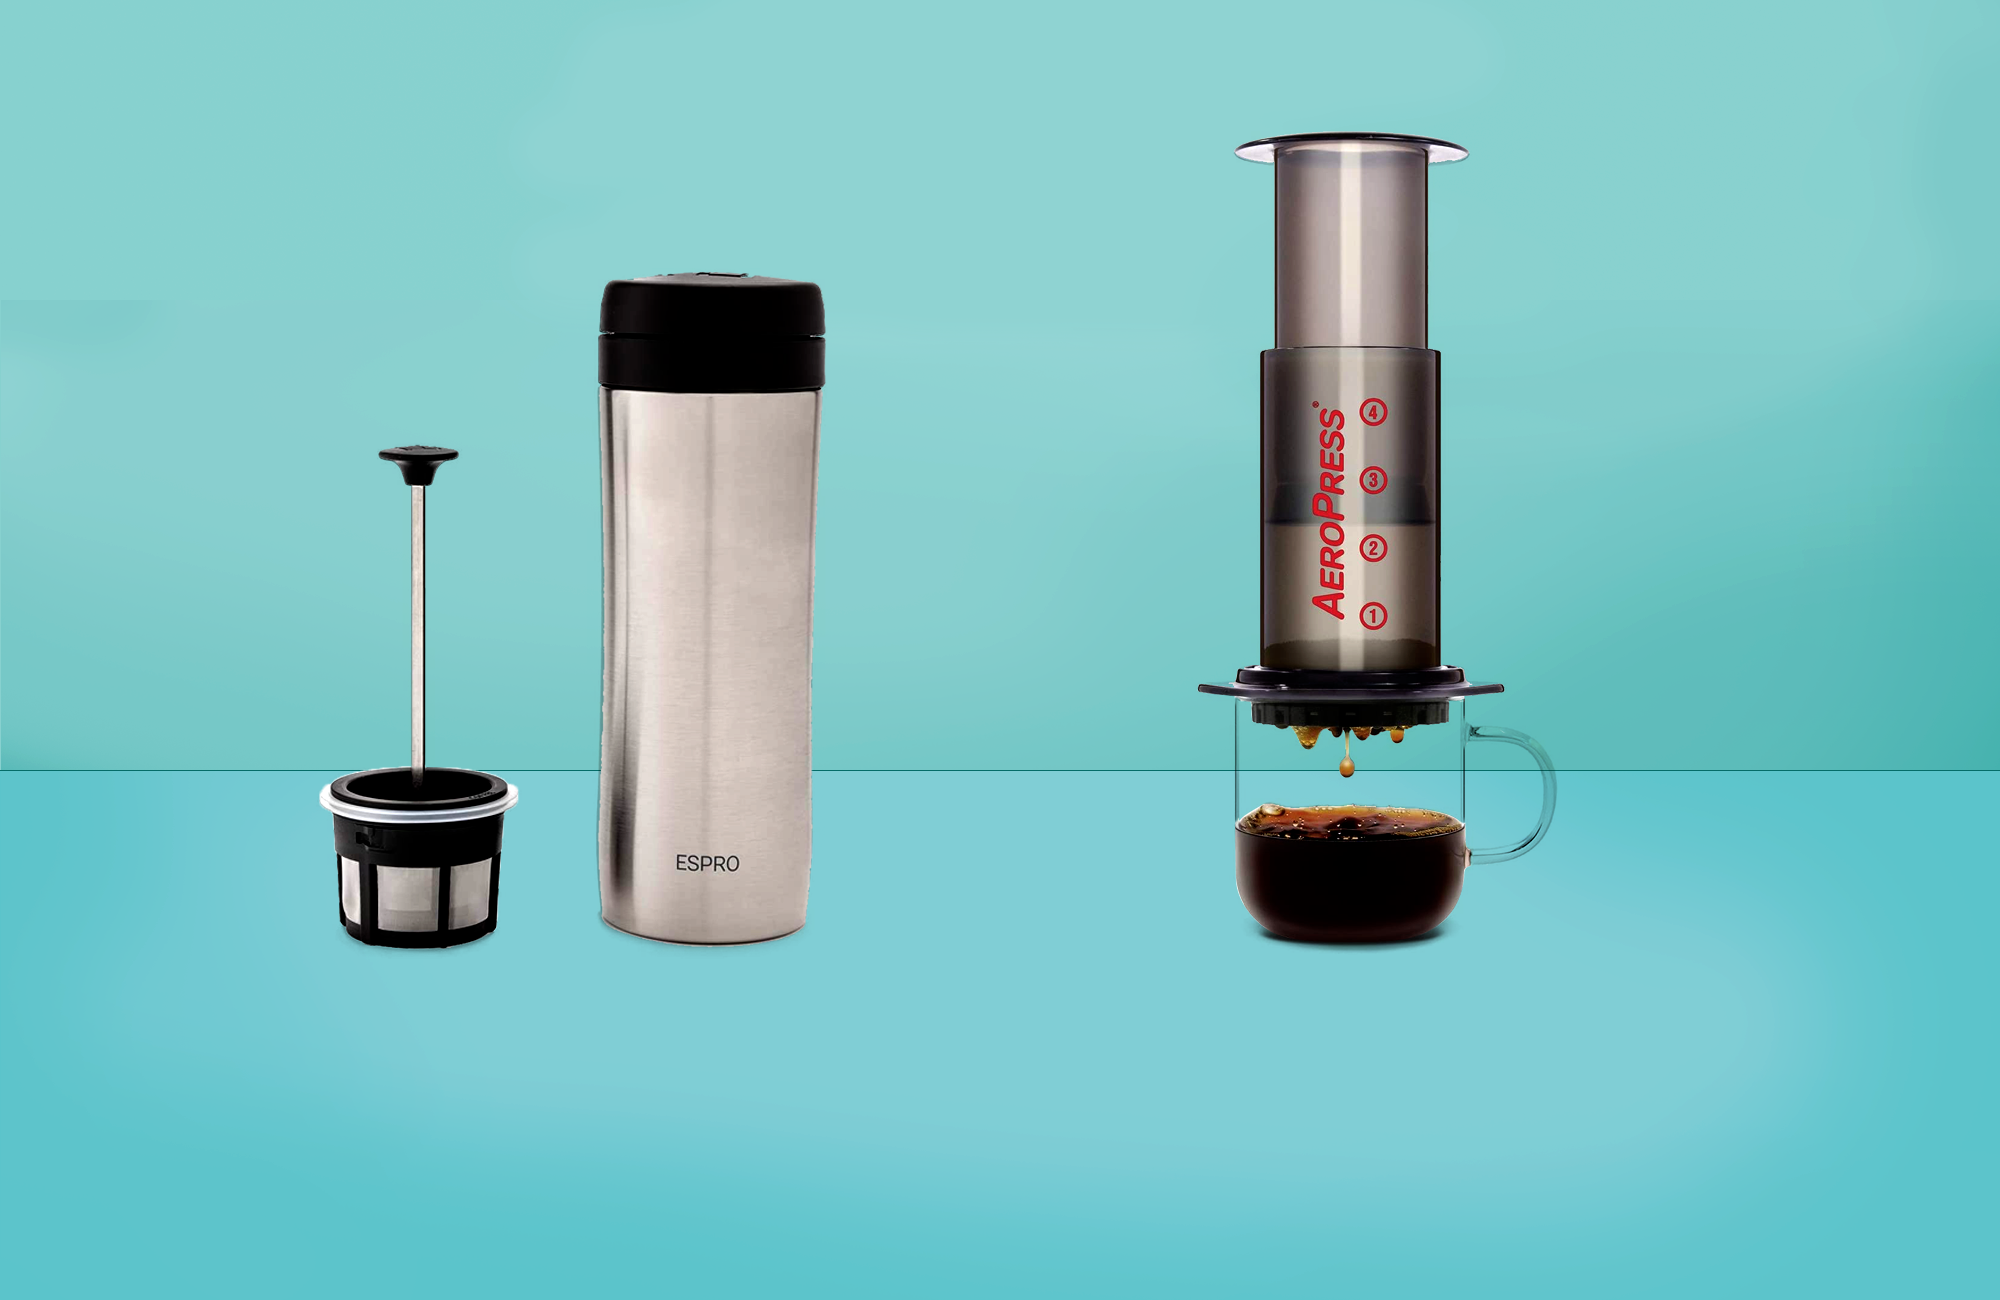 9 Camp French Press Models for Amazing Camping Coffee